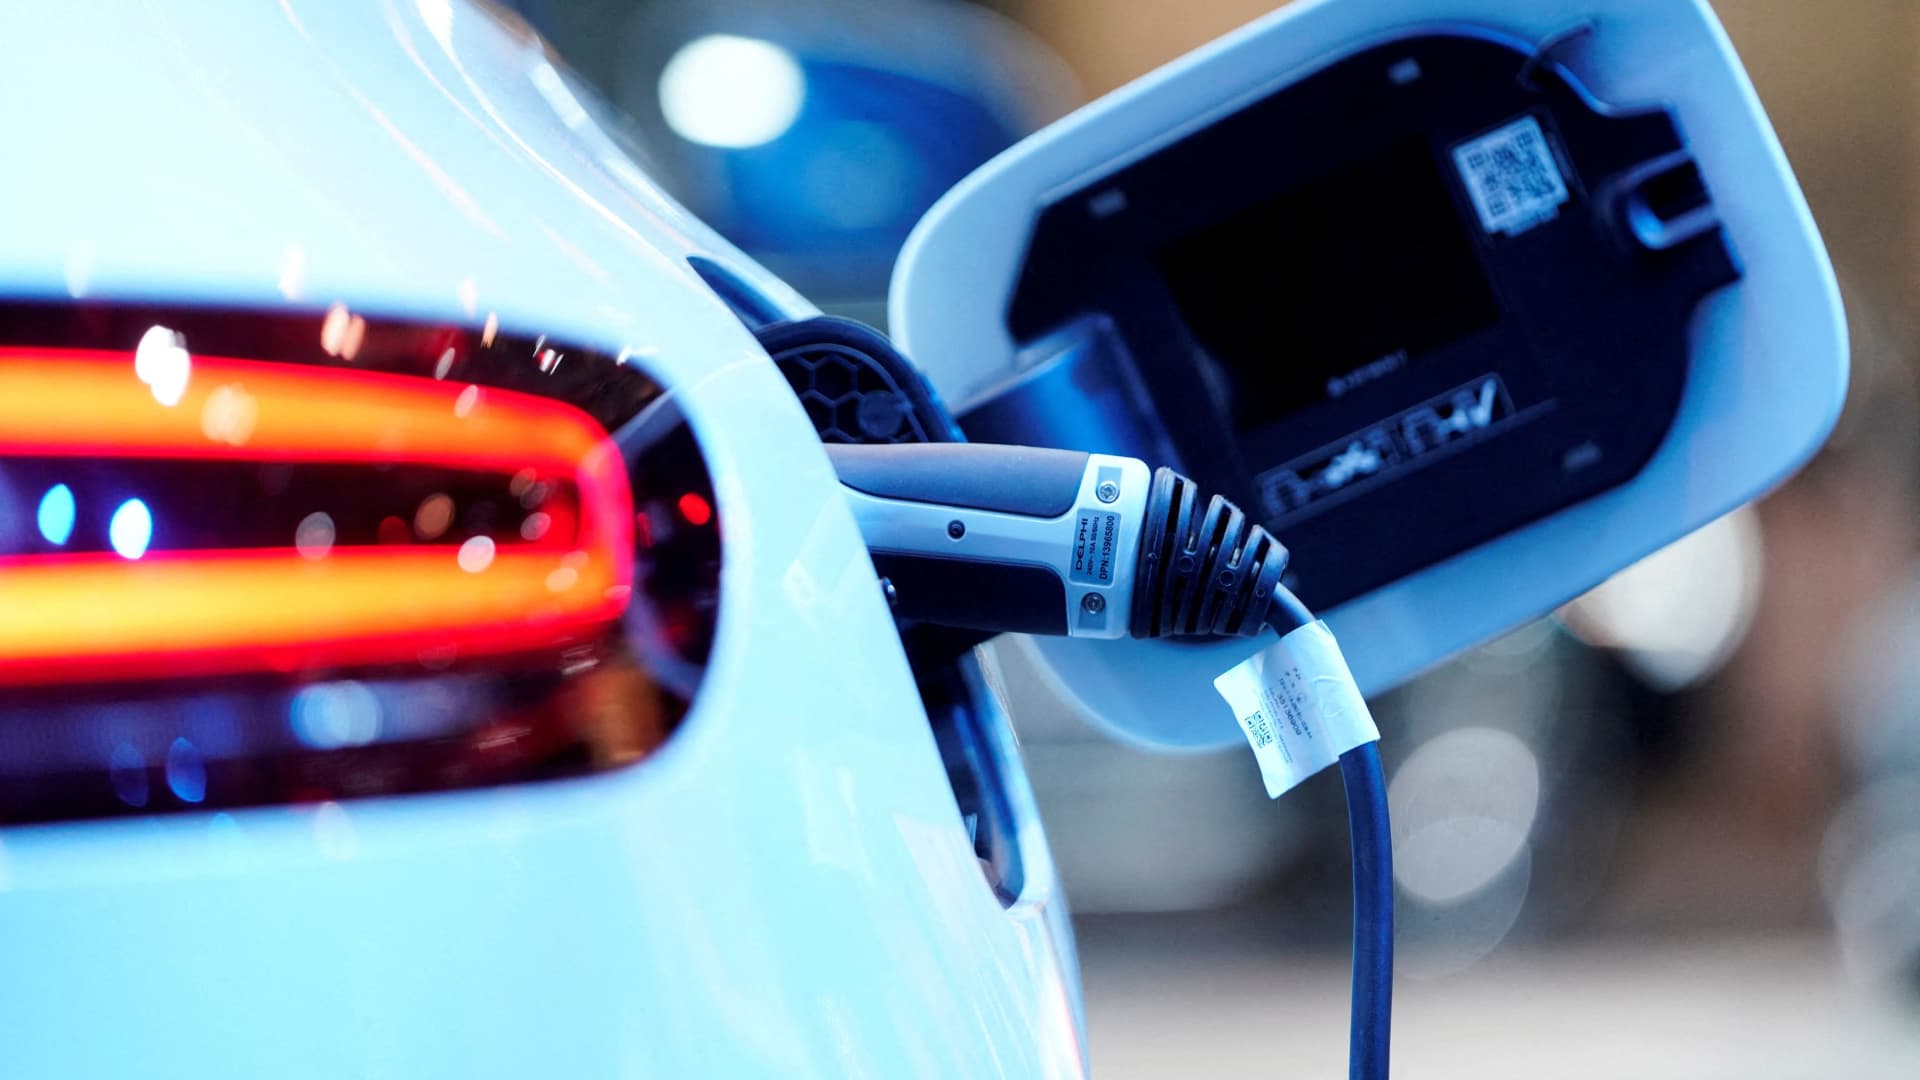 EV charging needs big improvements soon if the auto industry’s transition is going to work